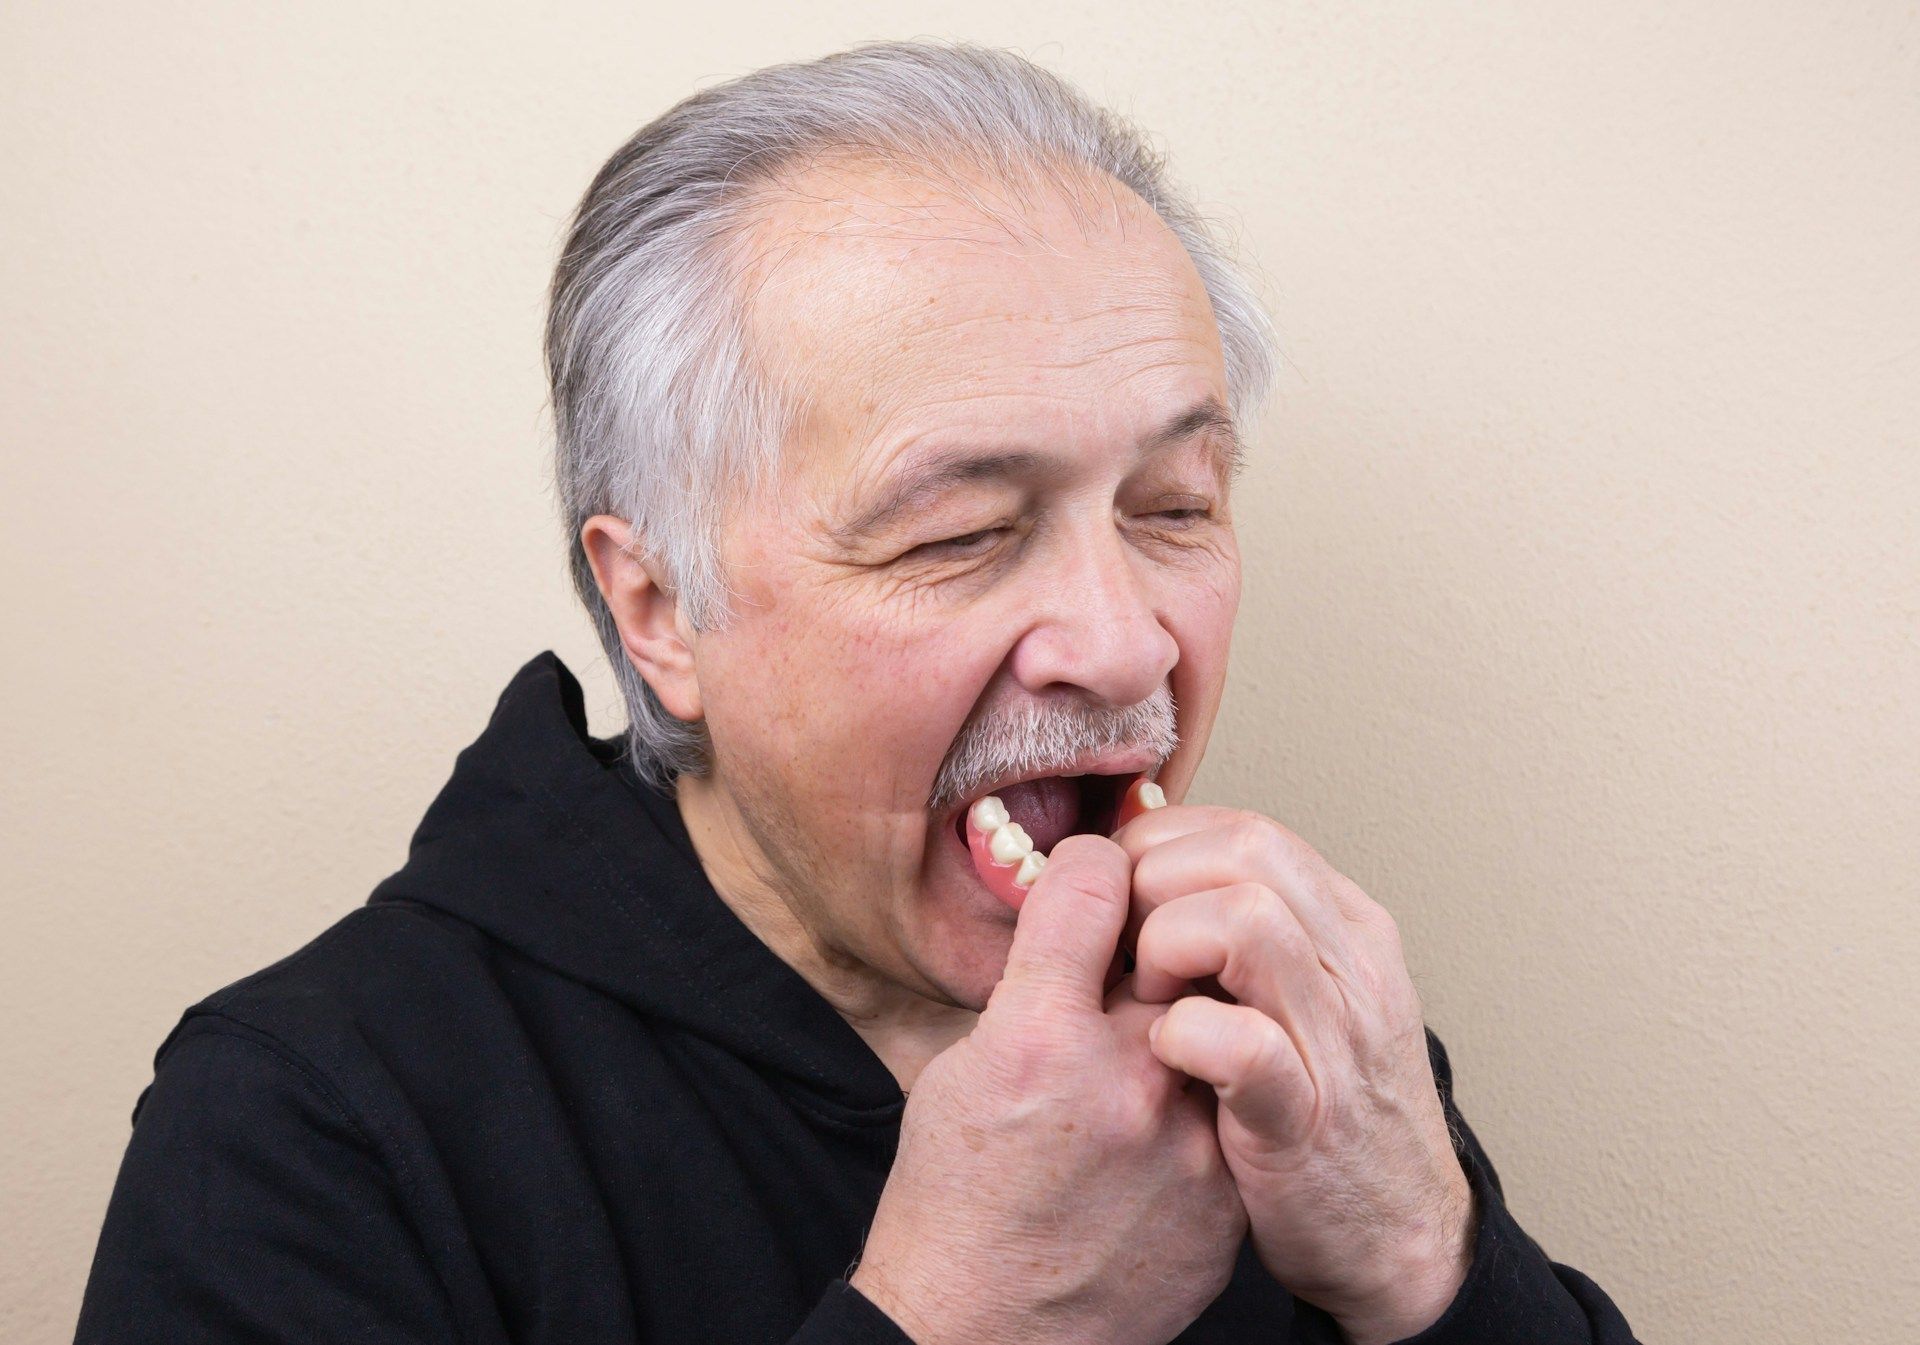 An elderly man is holding his denture in his hands.